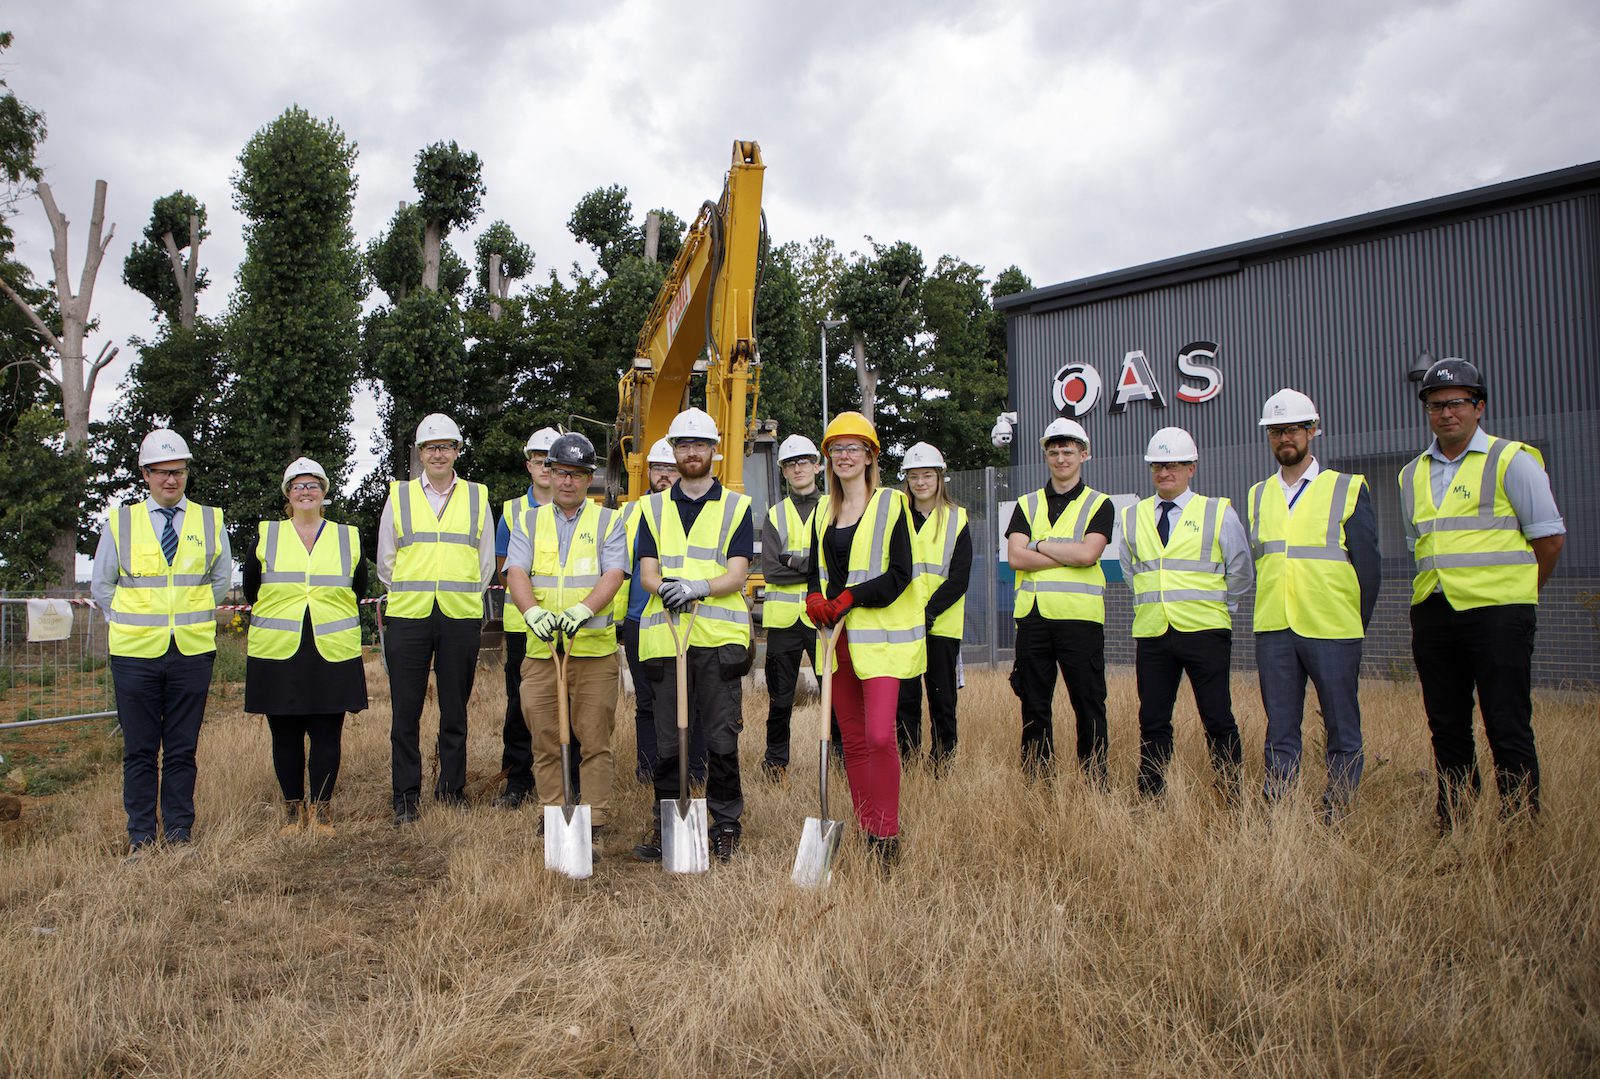 Oxfordshire training centre gets £13m revamp for tech apprenticeships